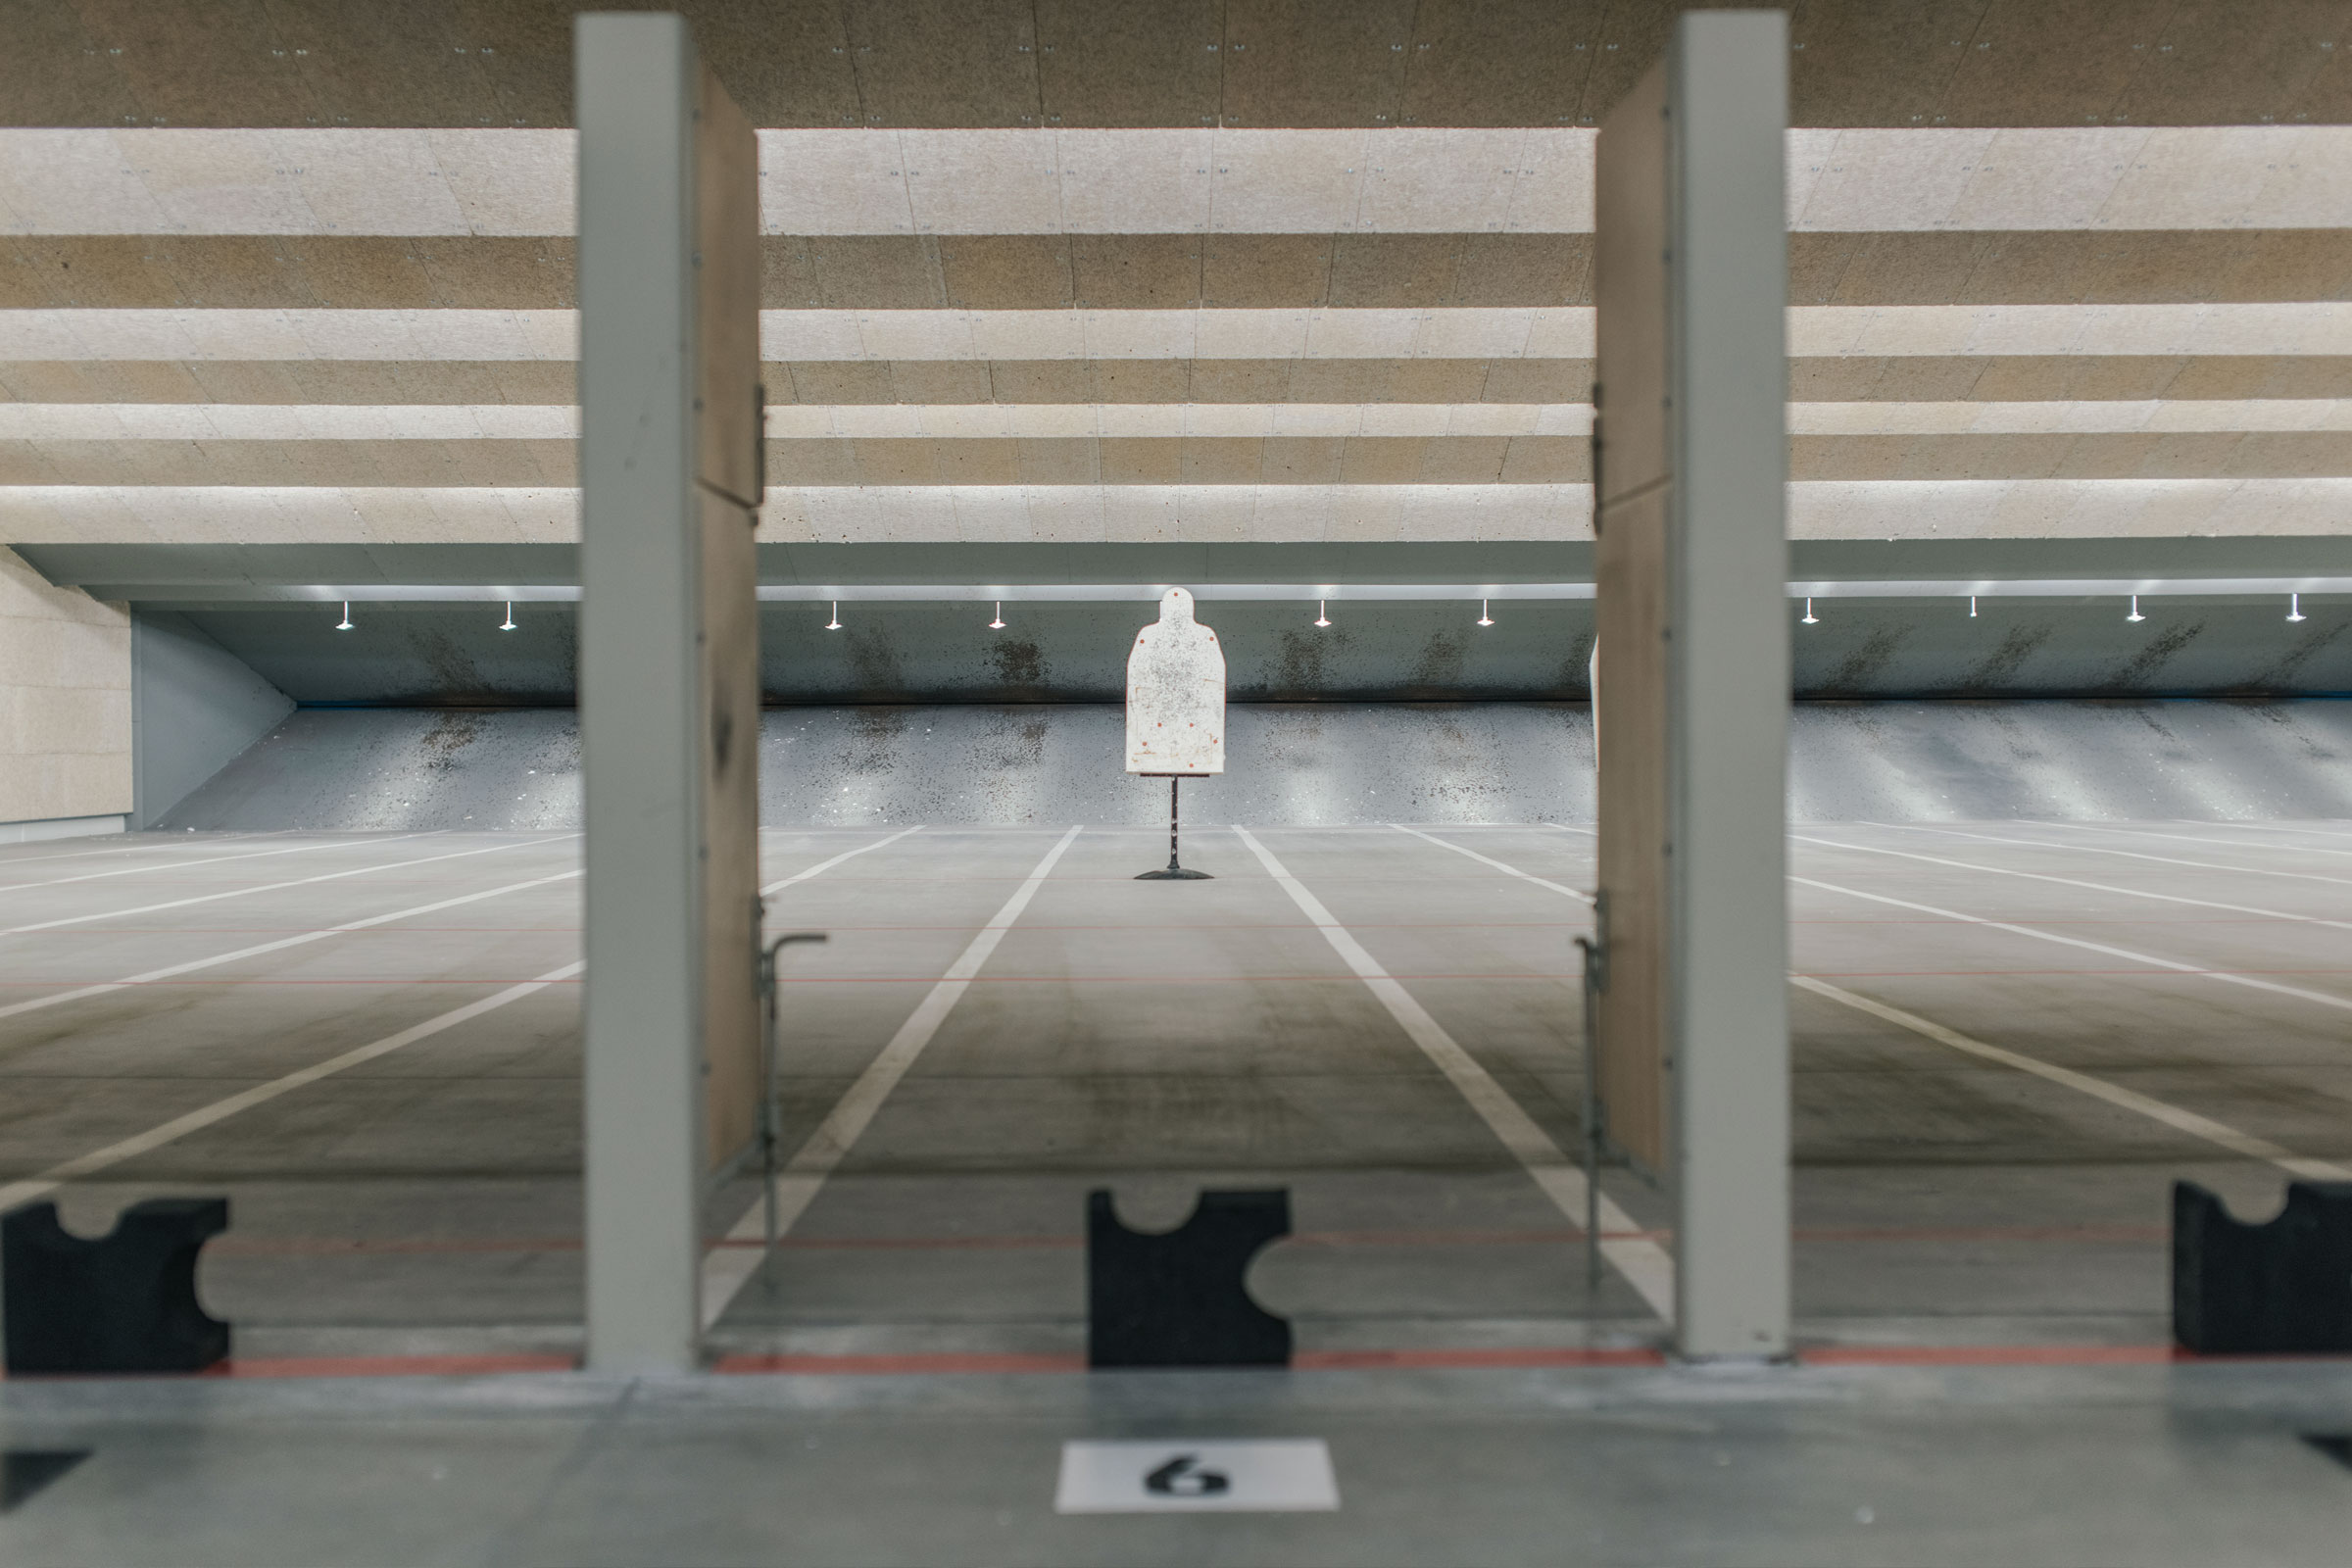 Indoor Small Arms Firing Range at Buckley Air Force Base, CO; Architect: Clark Nexsen Public Safety